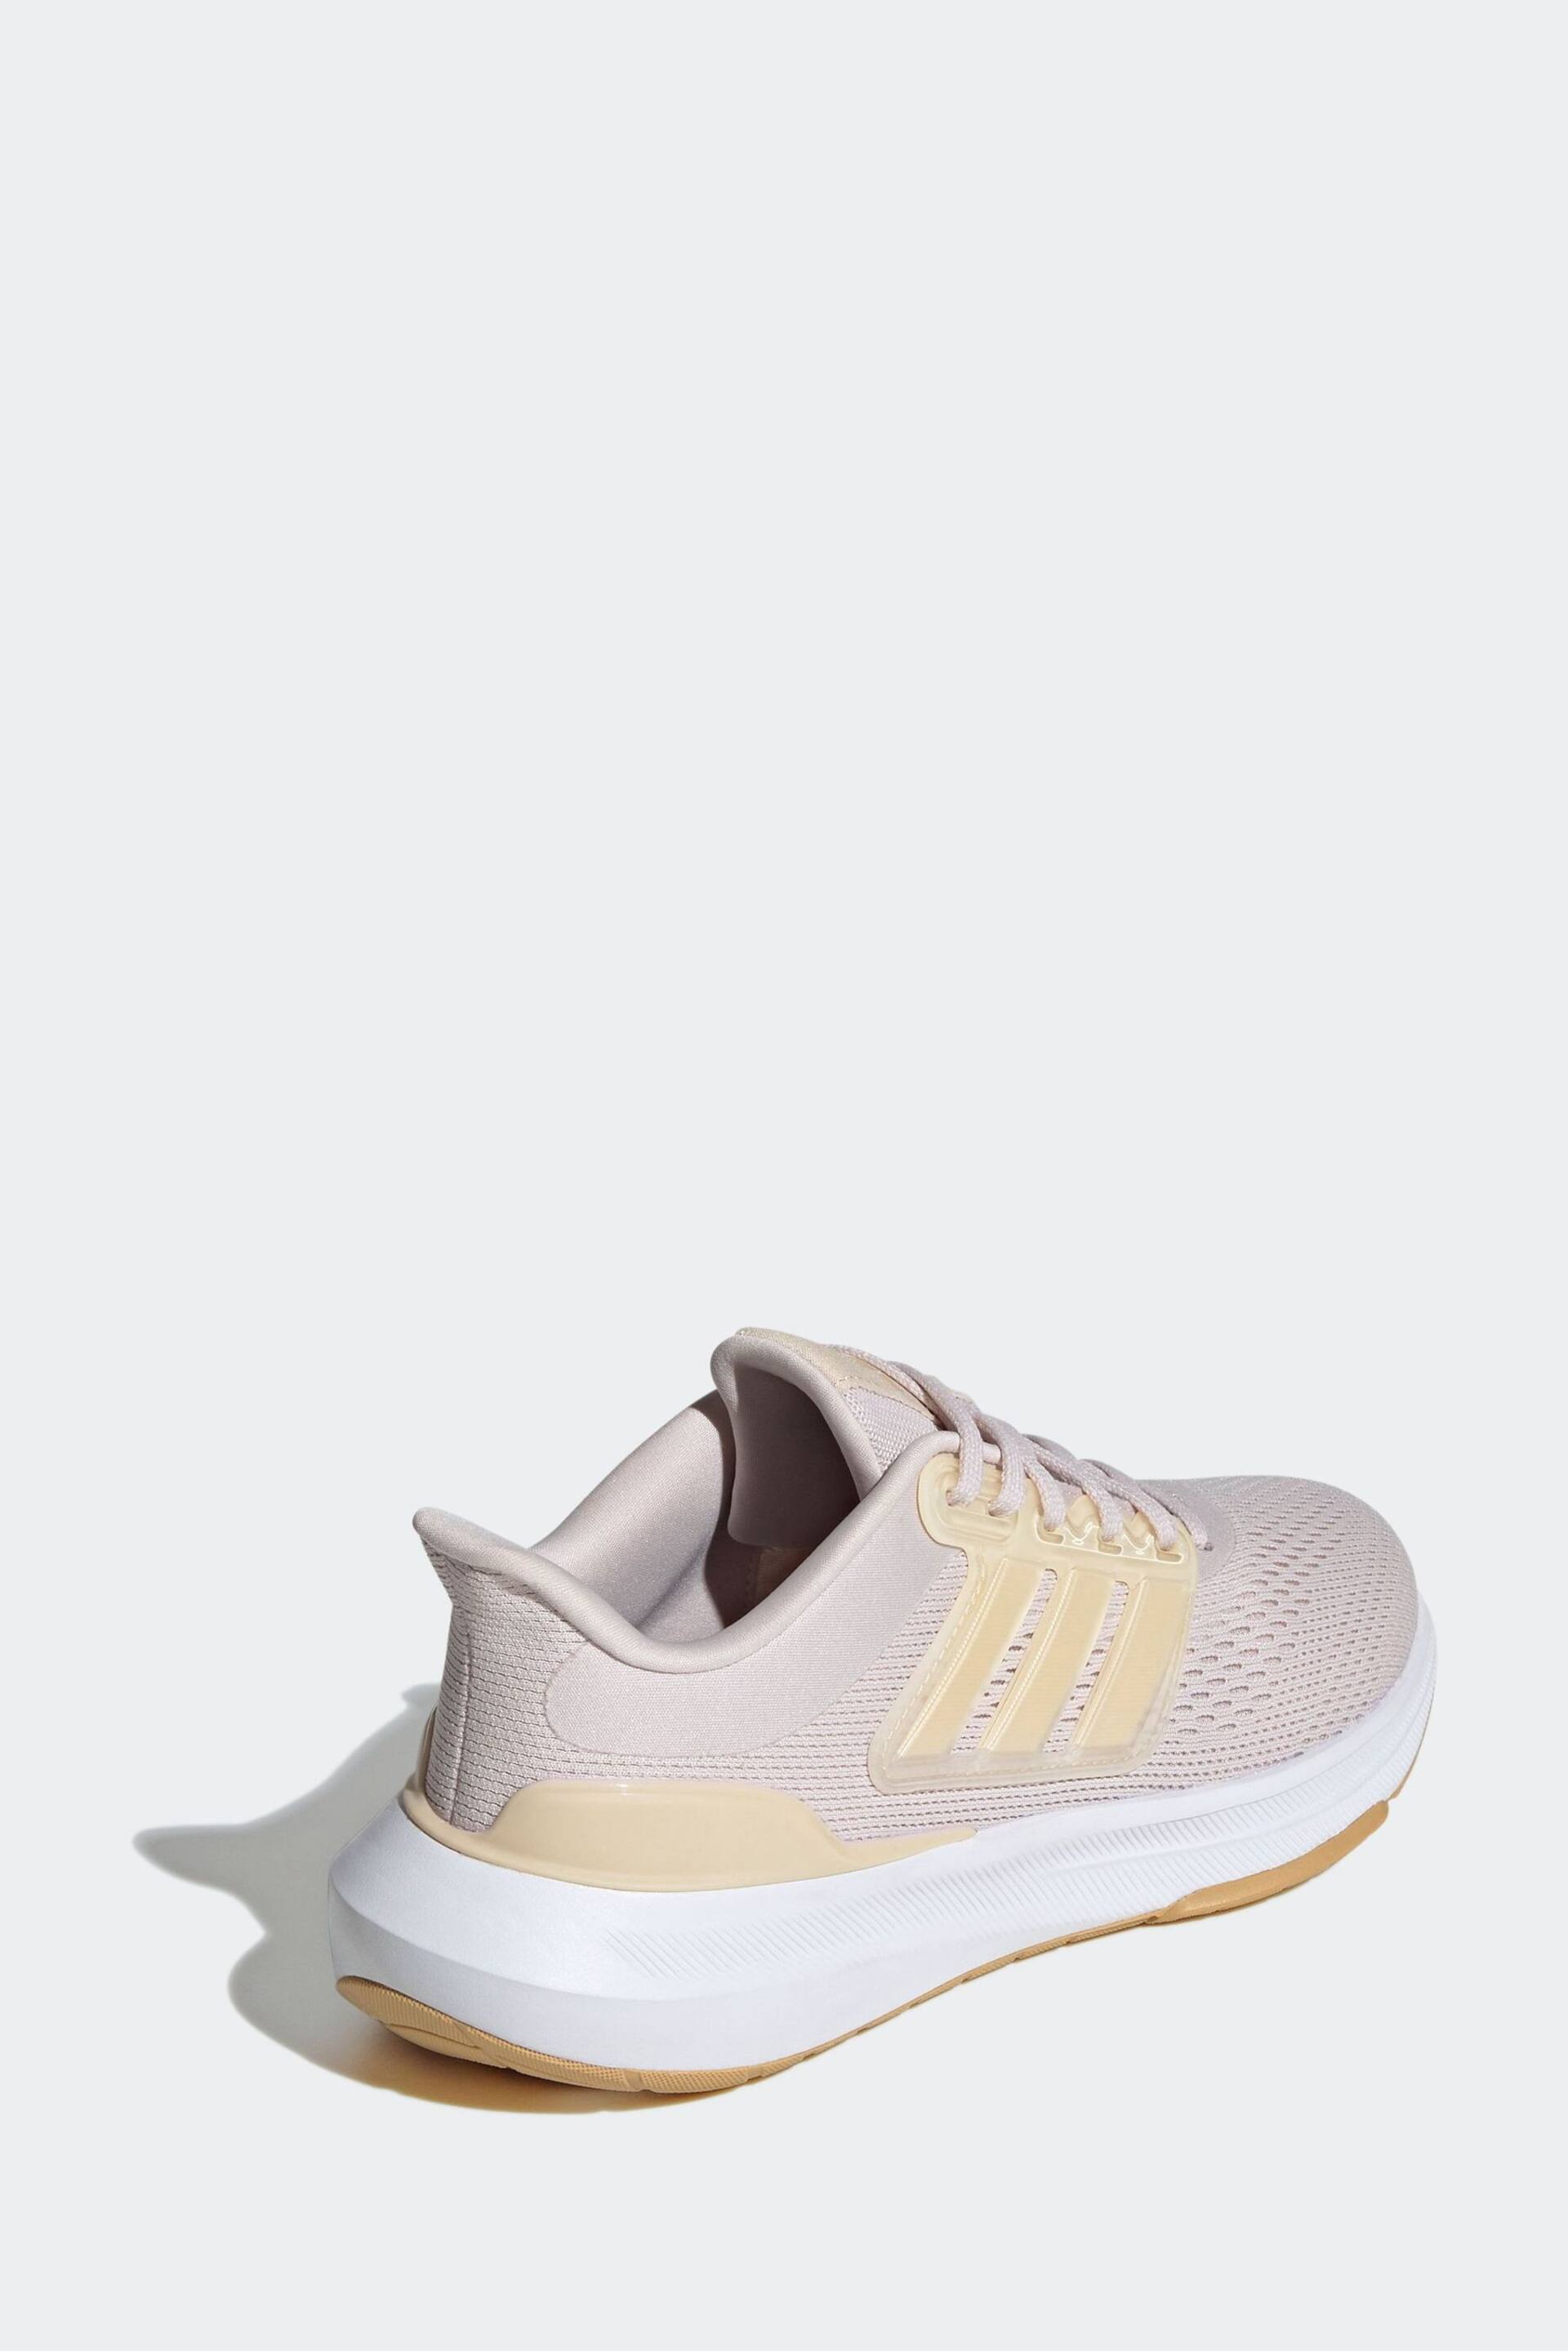 adidas Pink Ultrabounce Trainers - Image 3 of 8